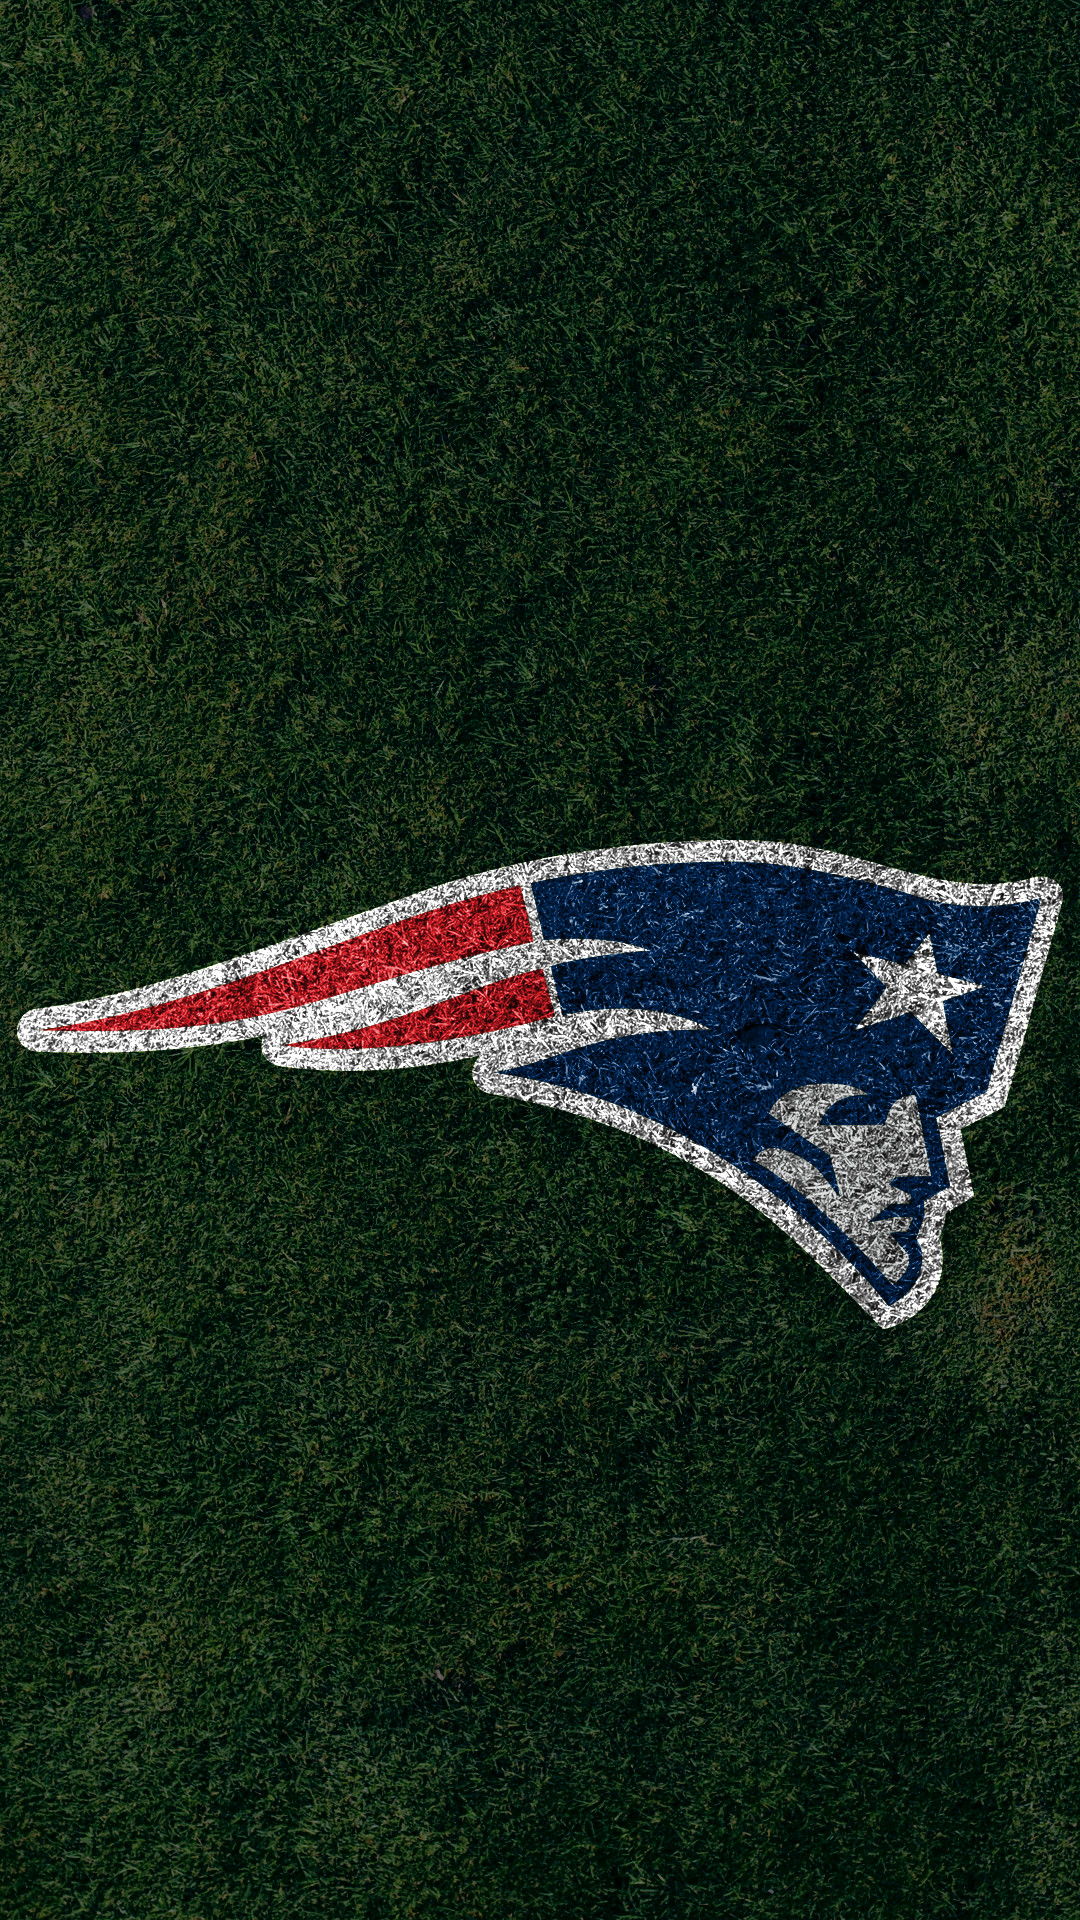 1080x1920 New England Patriots 2018 turf logo wallpaper free for desktop pc iphone  galaxy and andriod printable